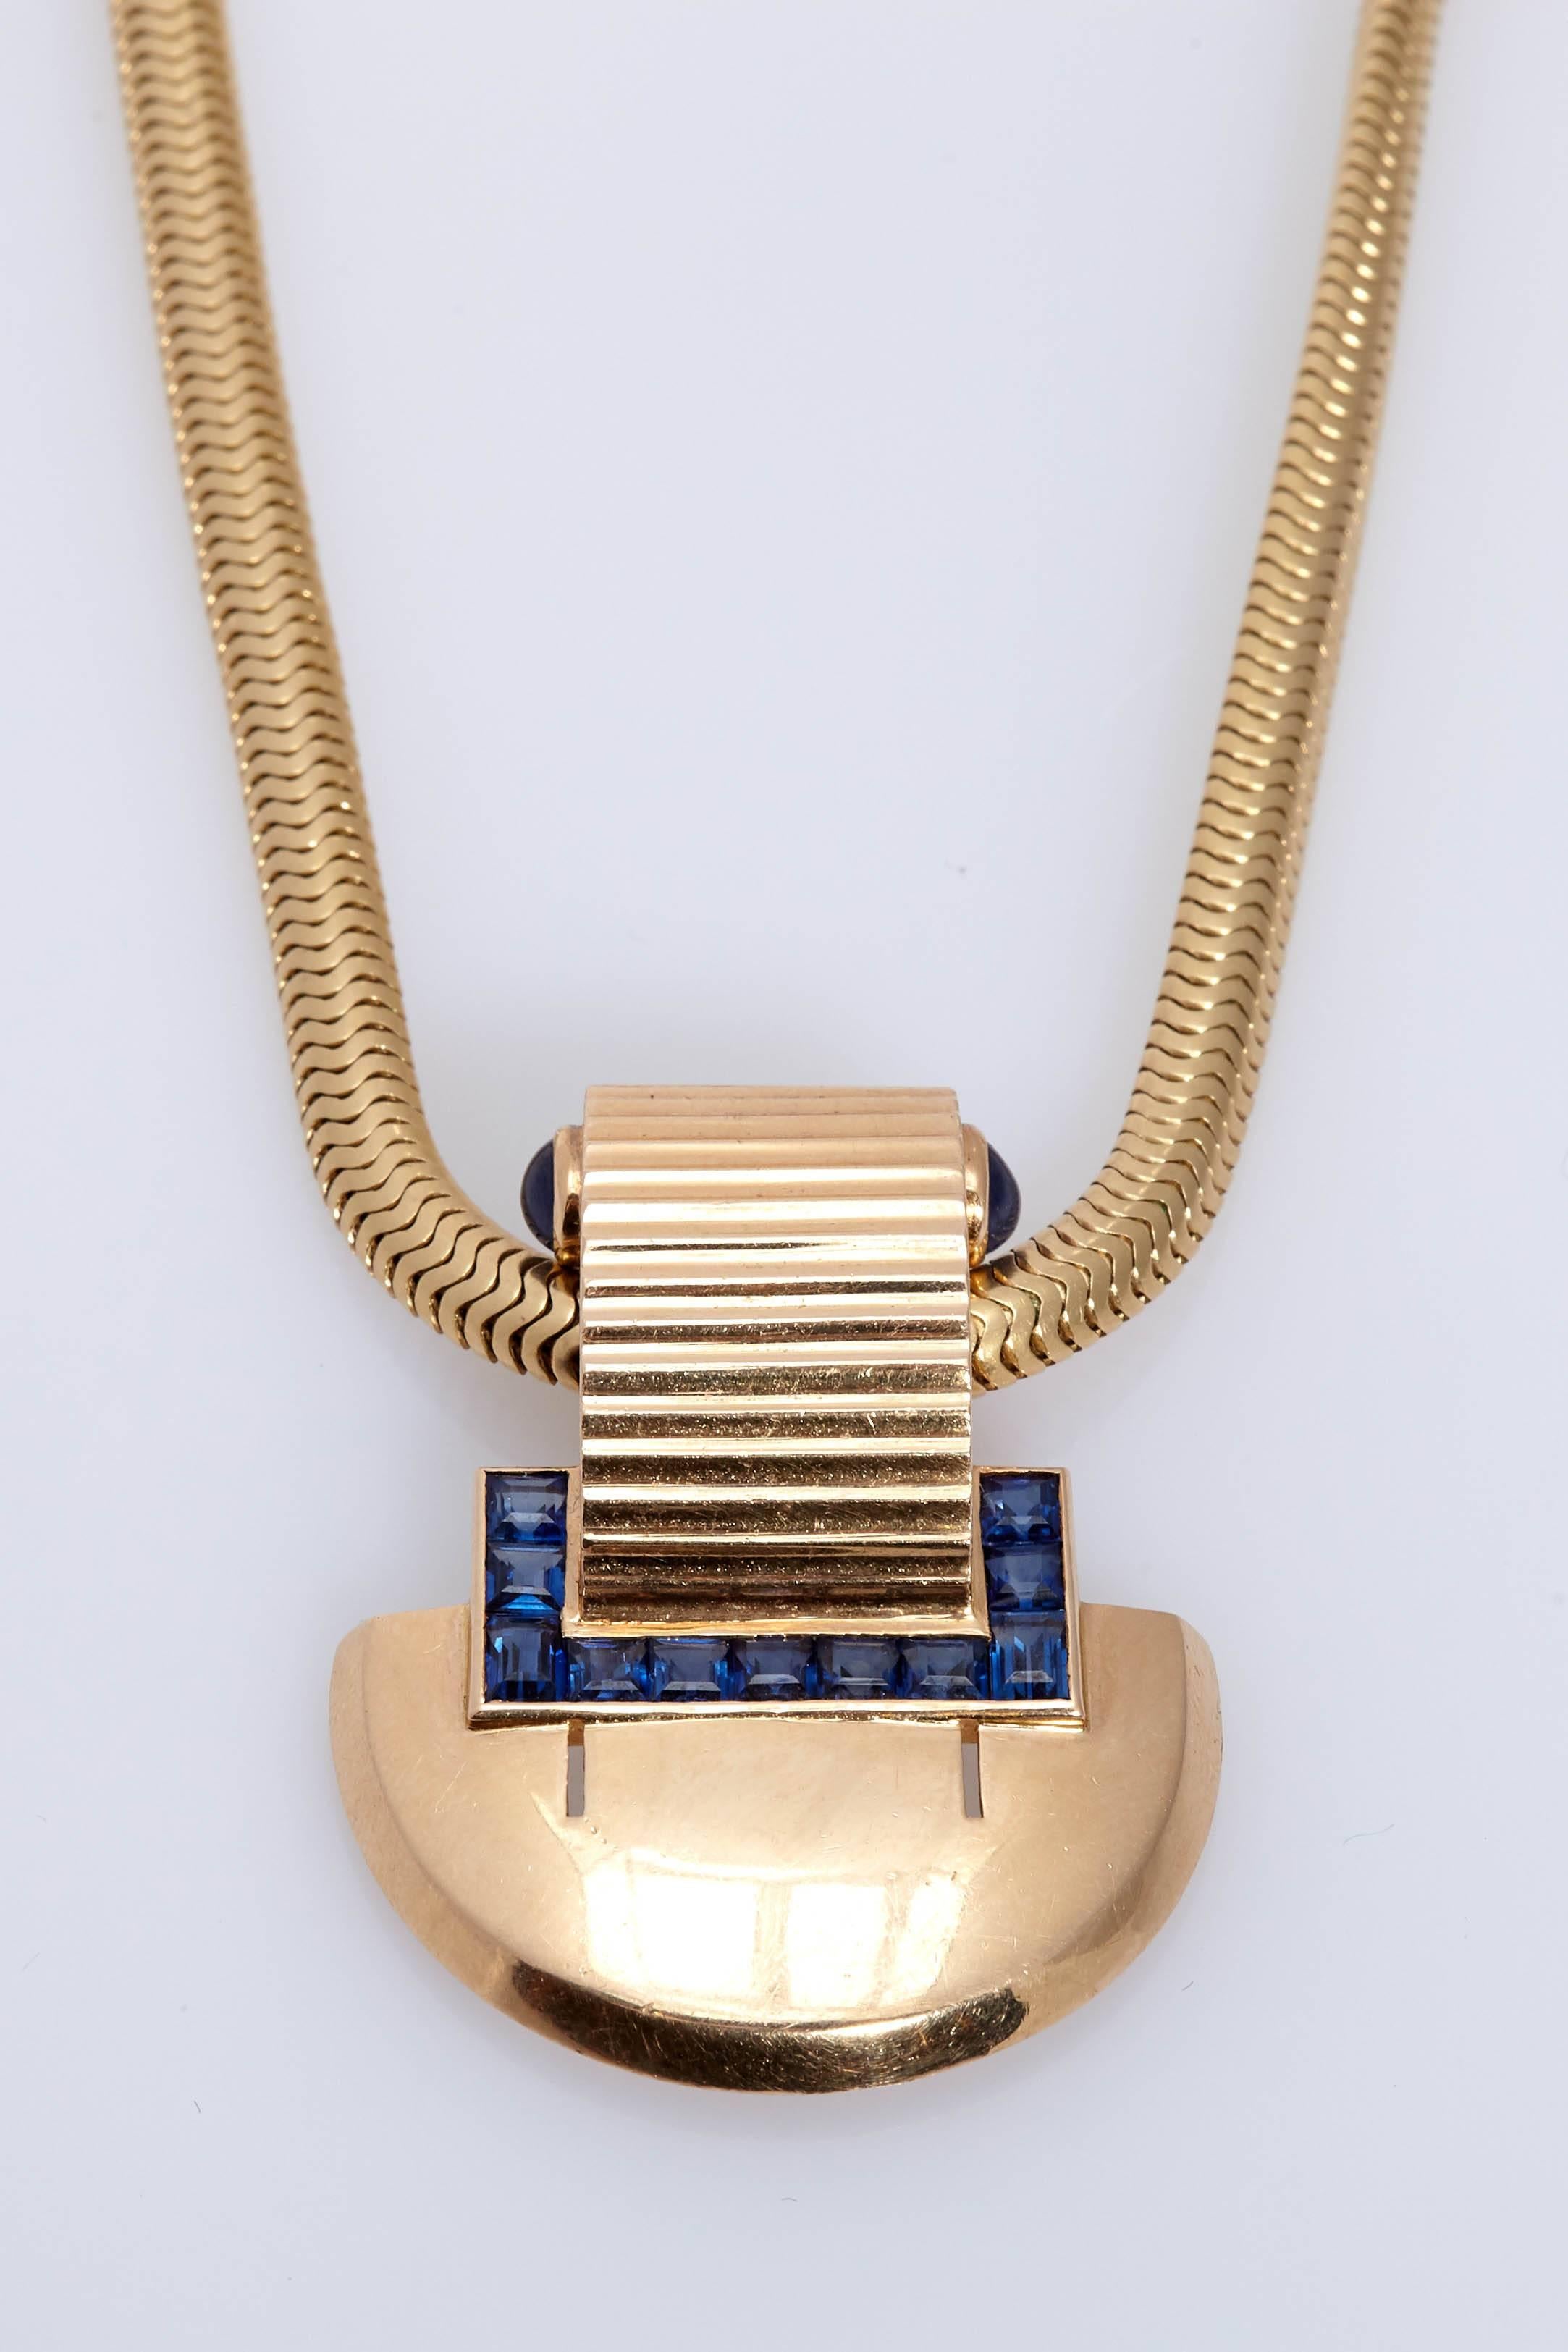 A Cartier retro 14kt gold and sapphire necklace with detachable brooch. Made in New York, circa 1950